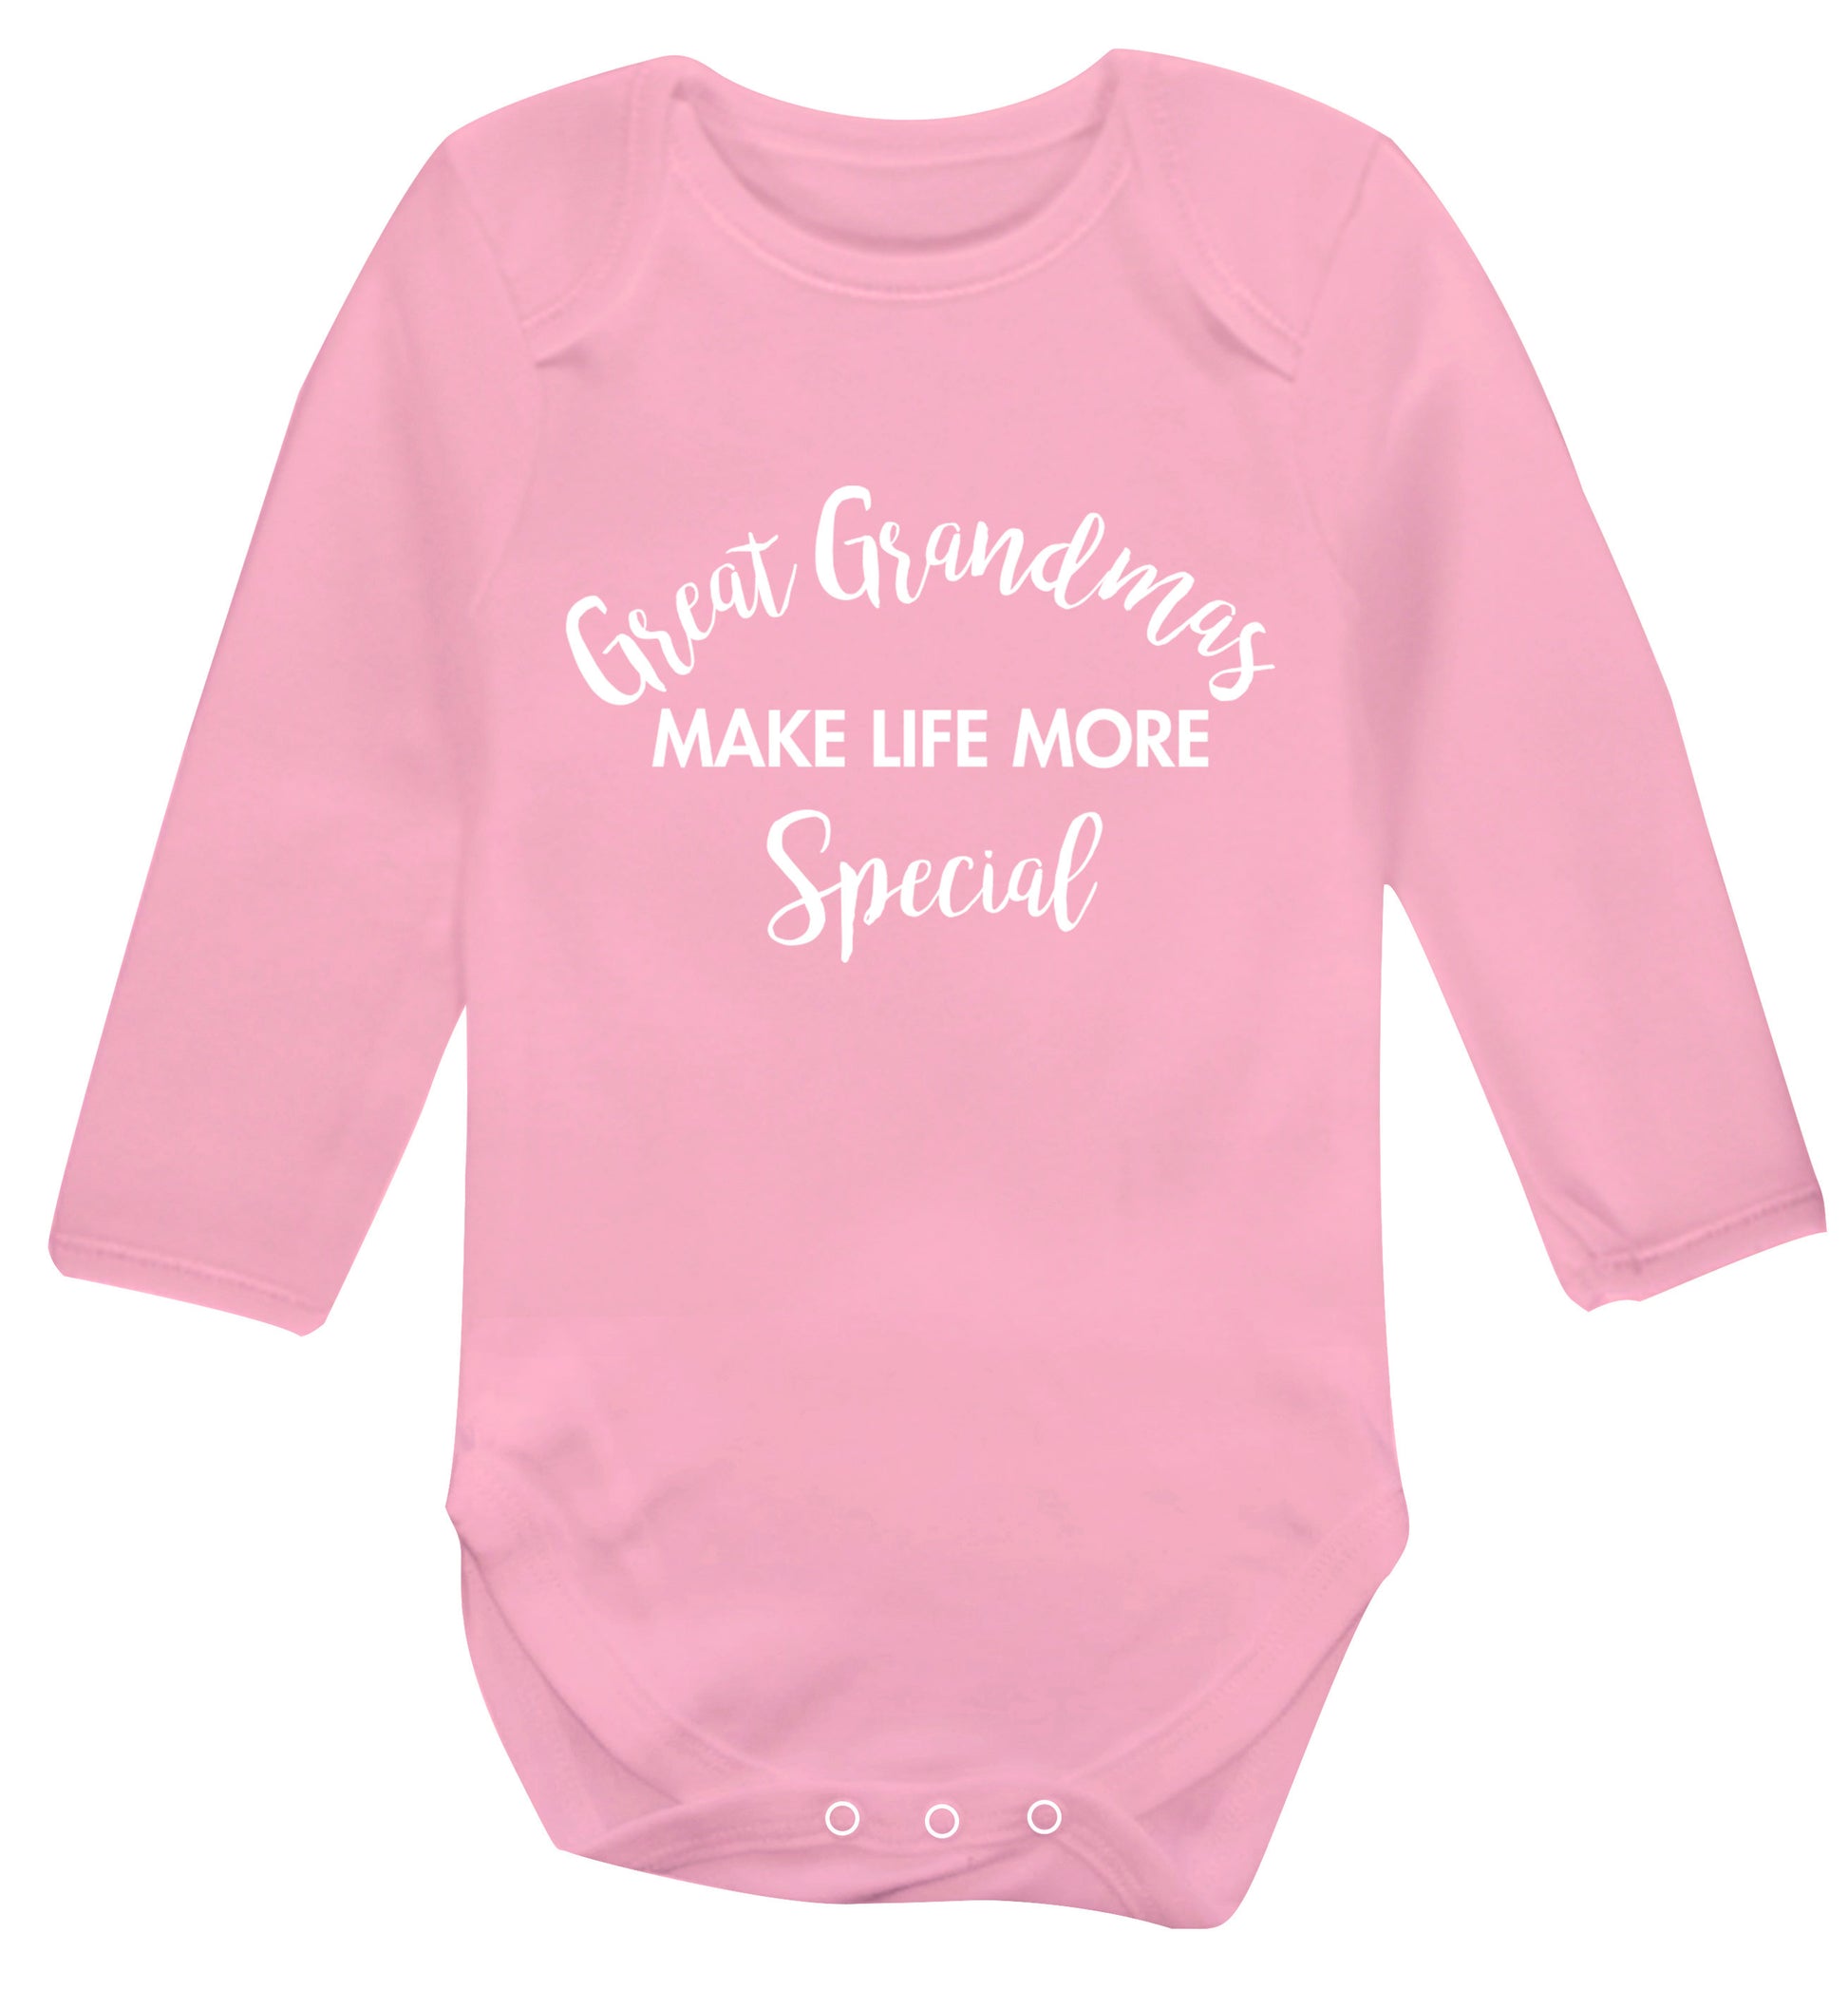 Great Grandmas make life more special Baby Vest long sleeved pale pink 6-12 months